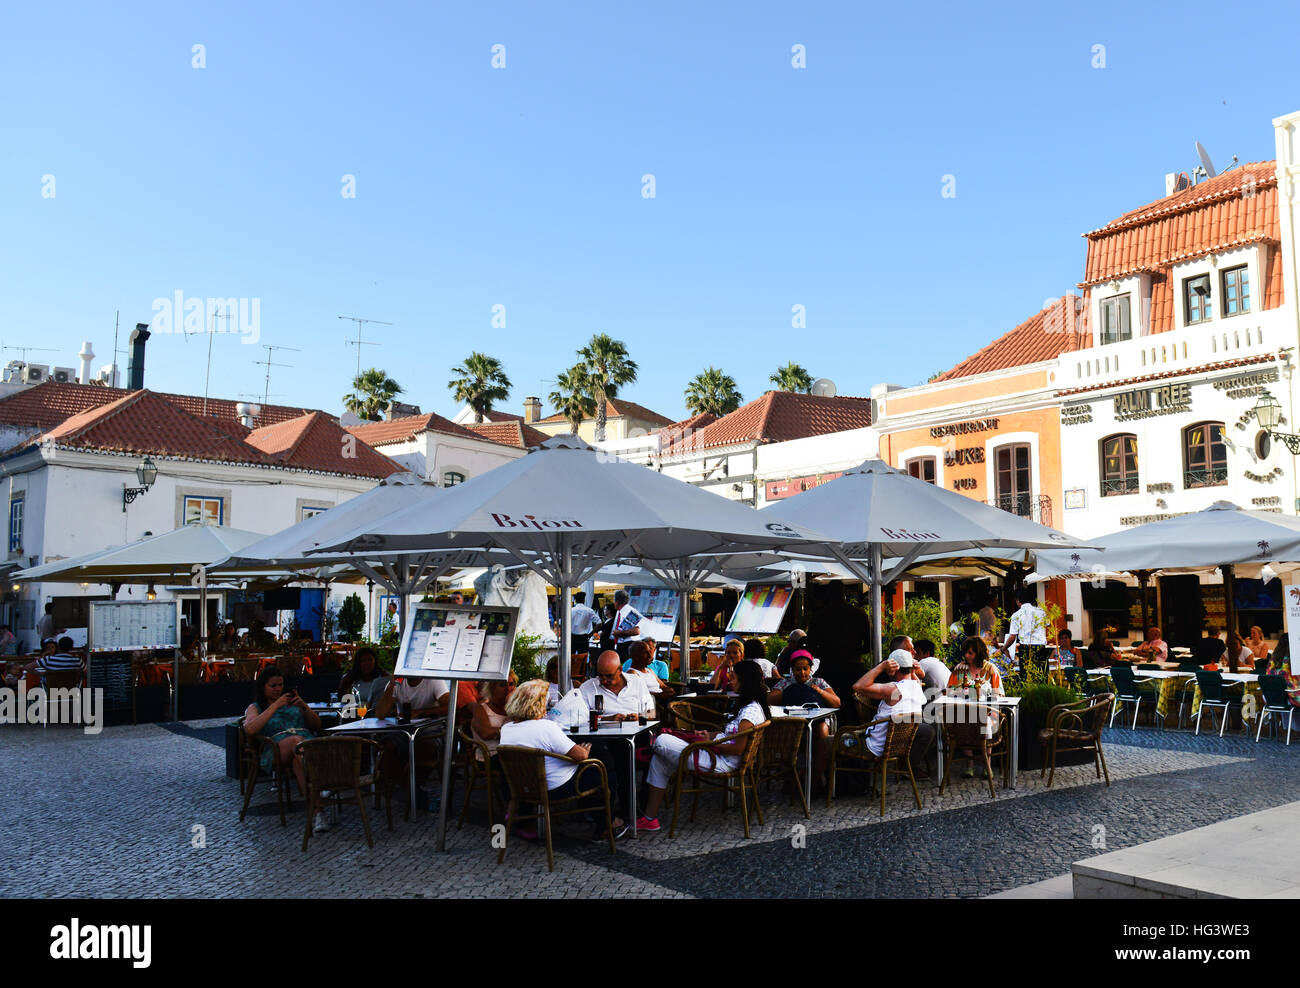 Tourist sitting in an outdoor café / restaurant in Cascais, Portugal. Stock Photo